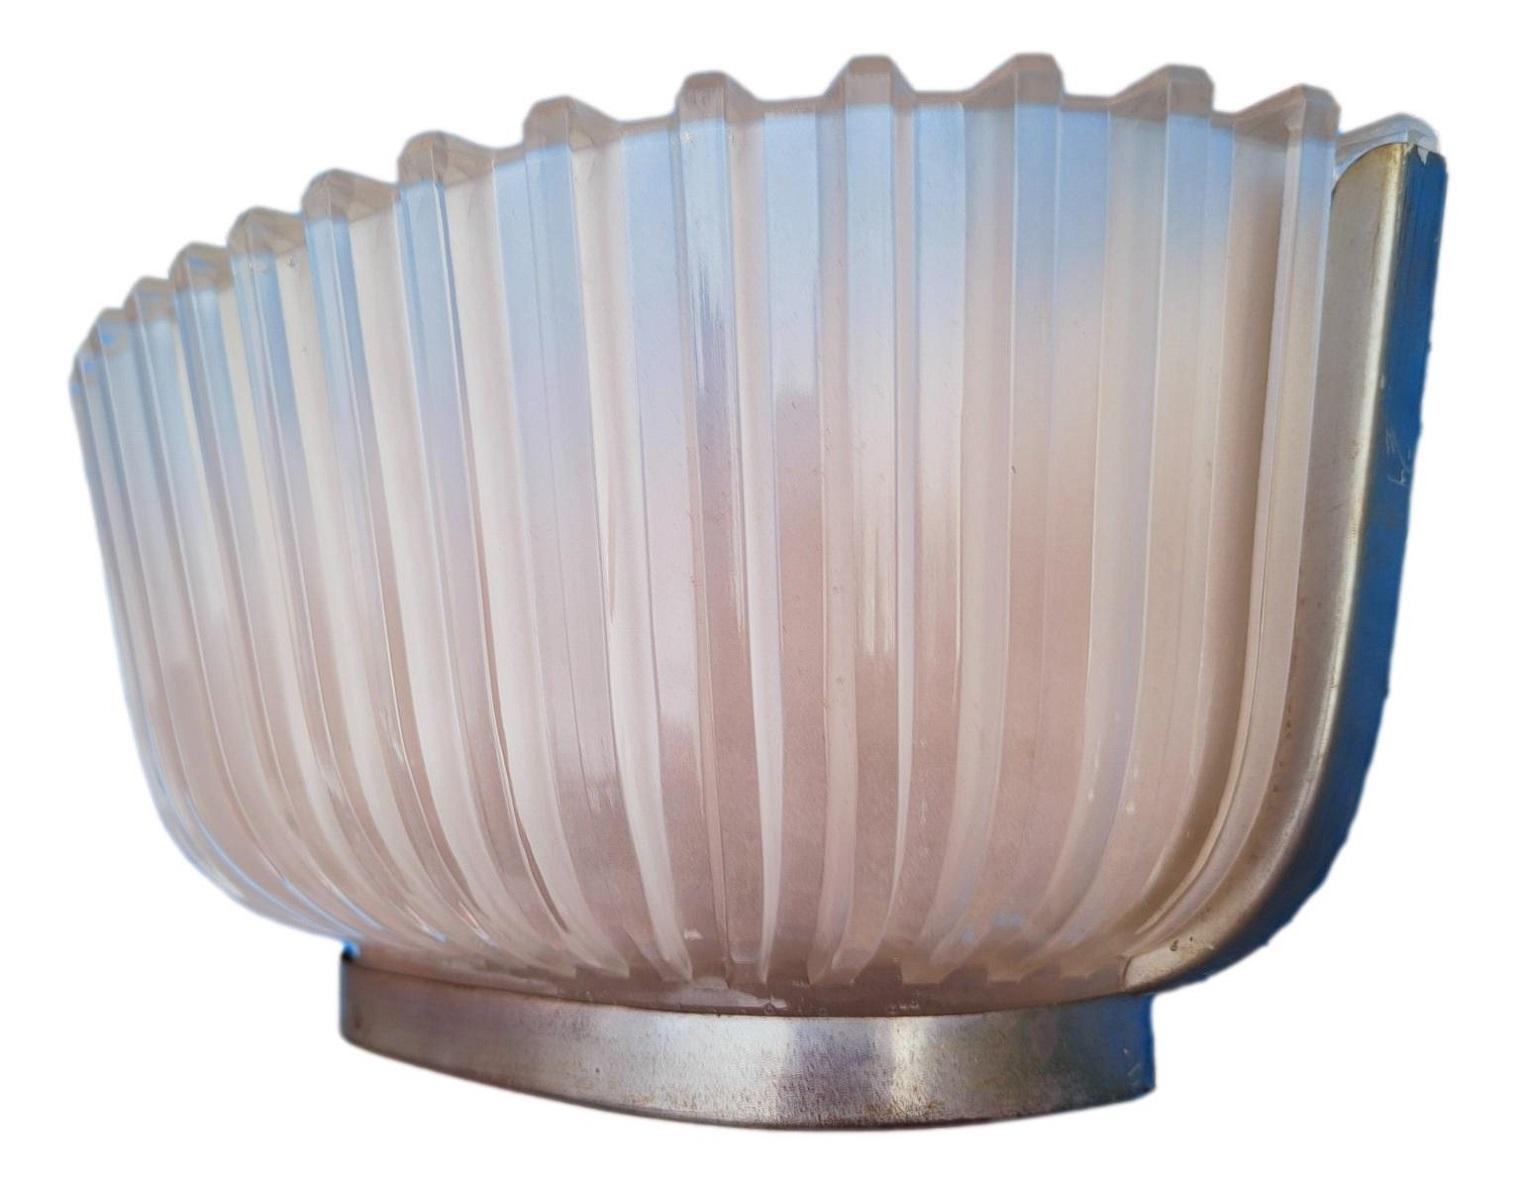 Superb original 40s wall lamp, production and design Archimede Seguso
made of ribbed Murano glass on metal structure
measuring 30 cm in length, 14 cm in height and 12 cm in protrusion from the wall
very good condition, considering the age, intact